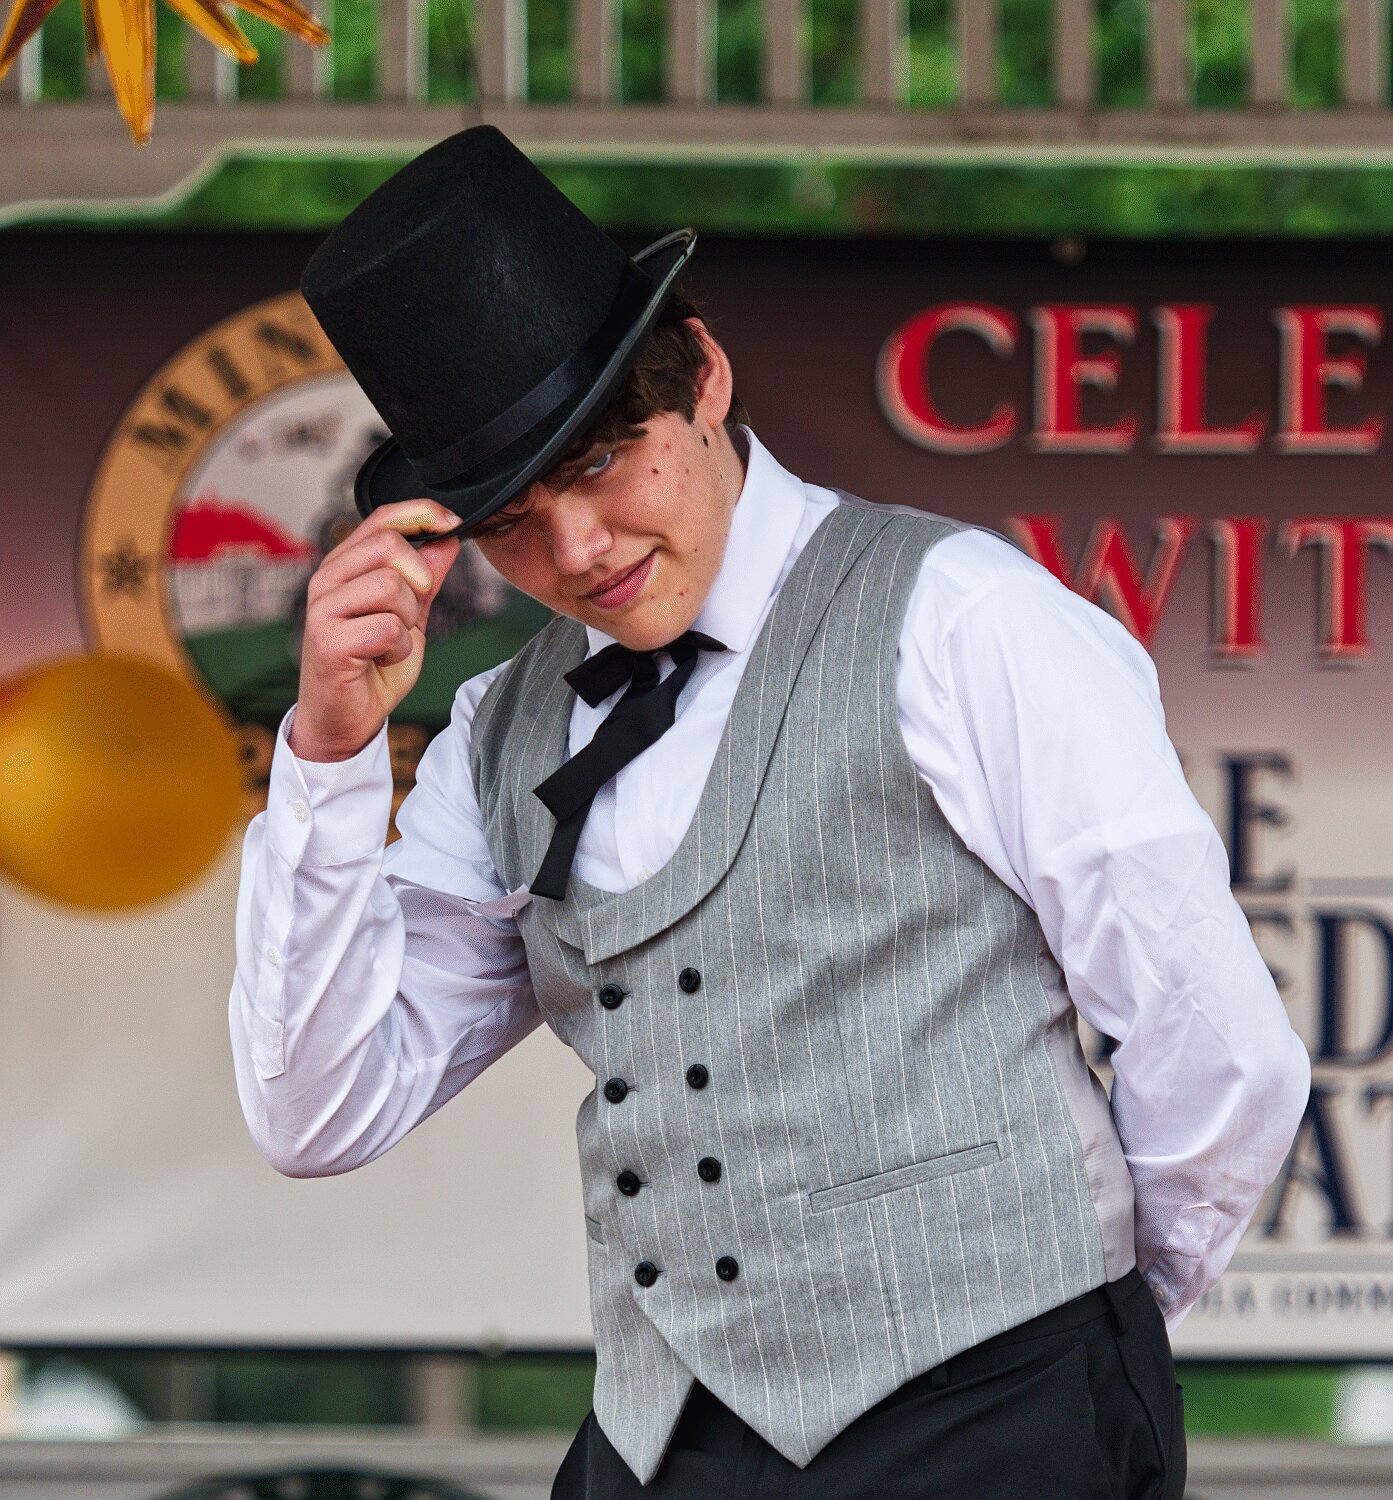 Ben Williams tips his hat to the judges and crowd, showing off his 1920s outfit. [see so many more sesquicentennial spring fling photos]